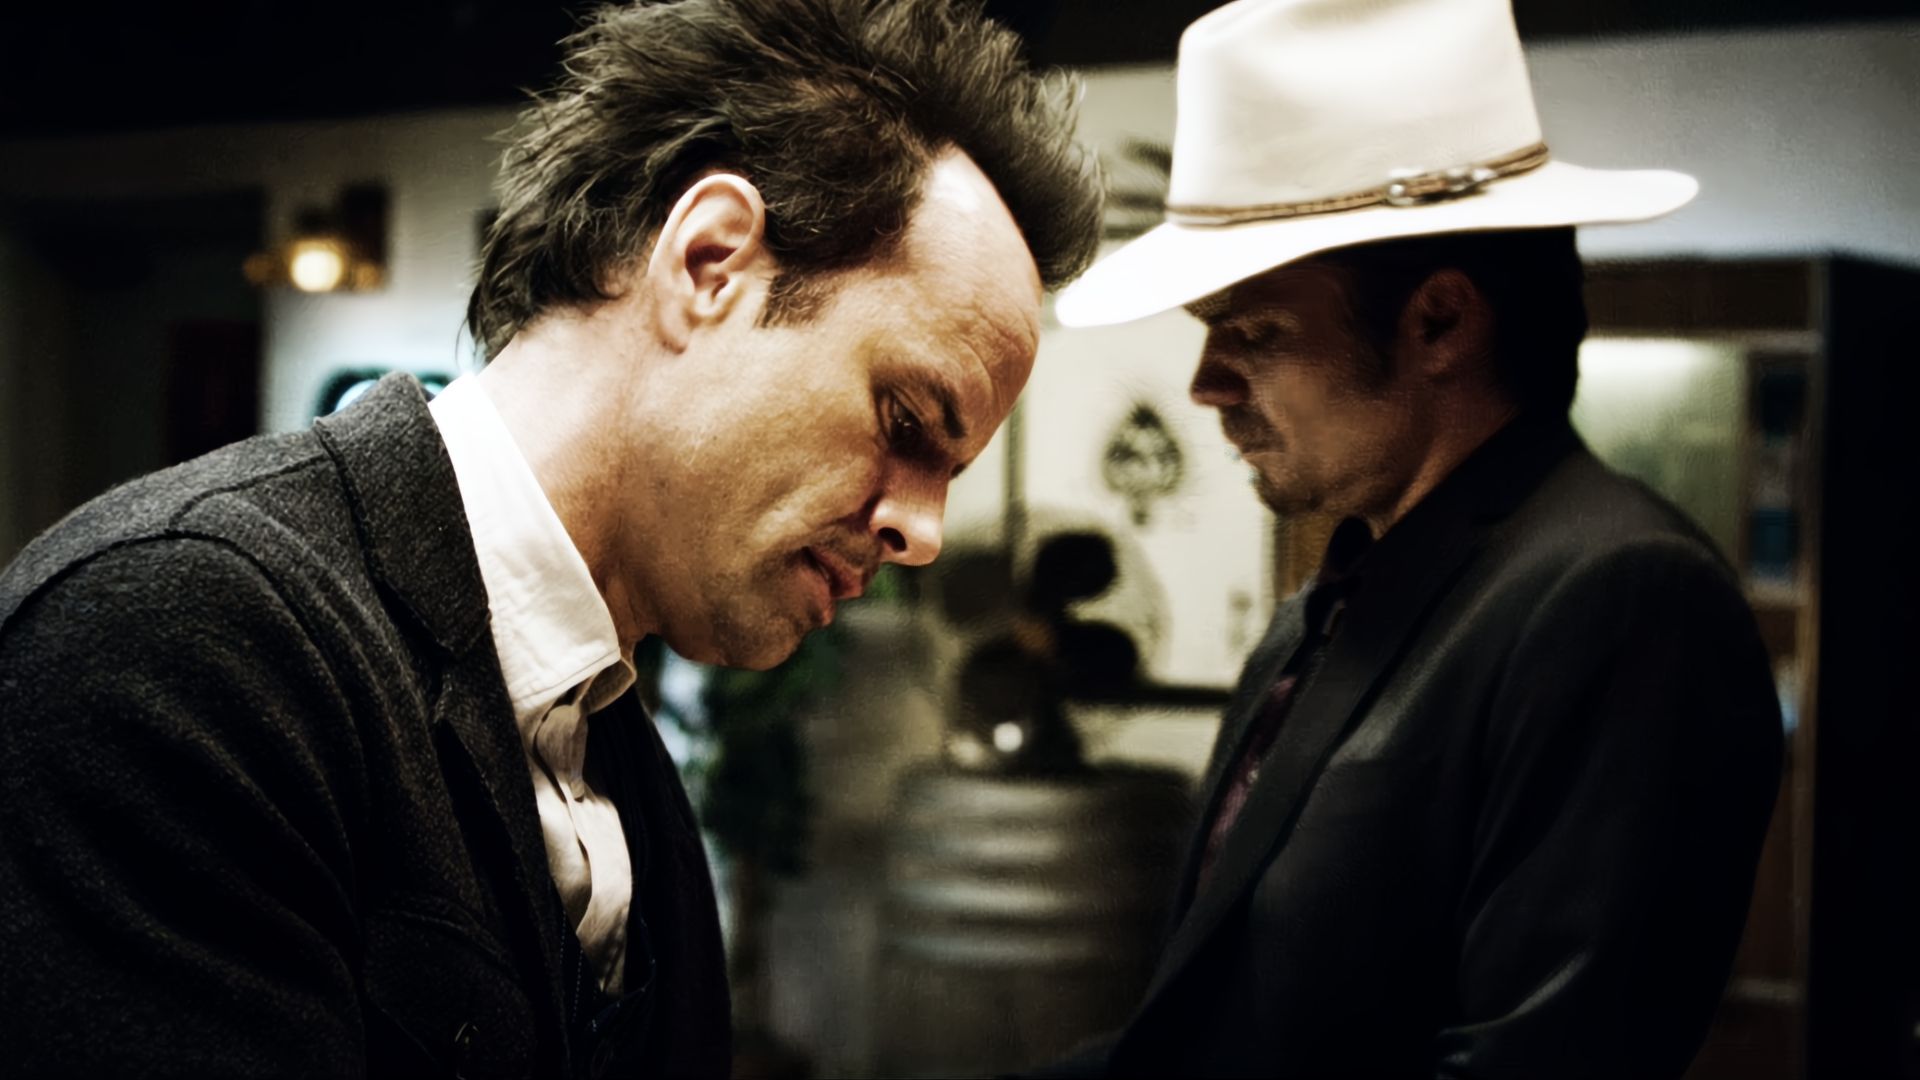 Timothy Olyphant and Walton Goggins as Boyd Crowther in the TV show Justified